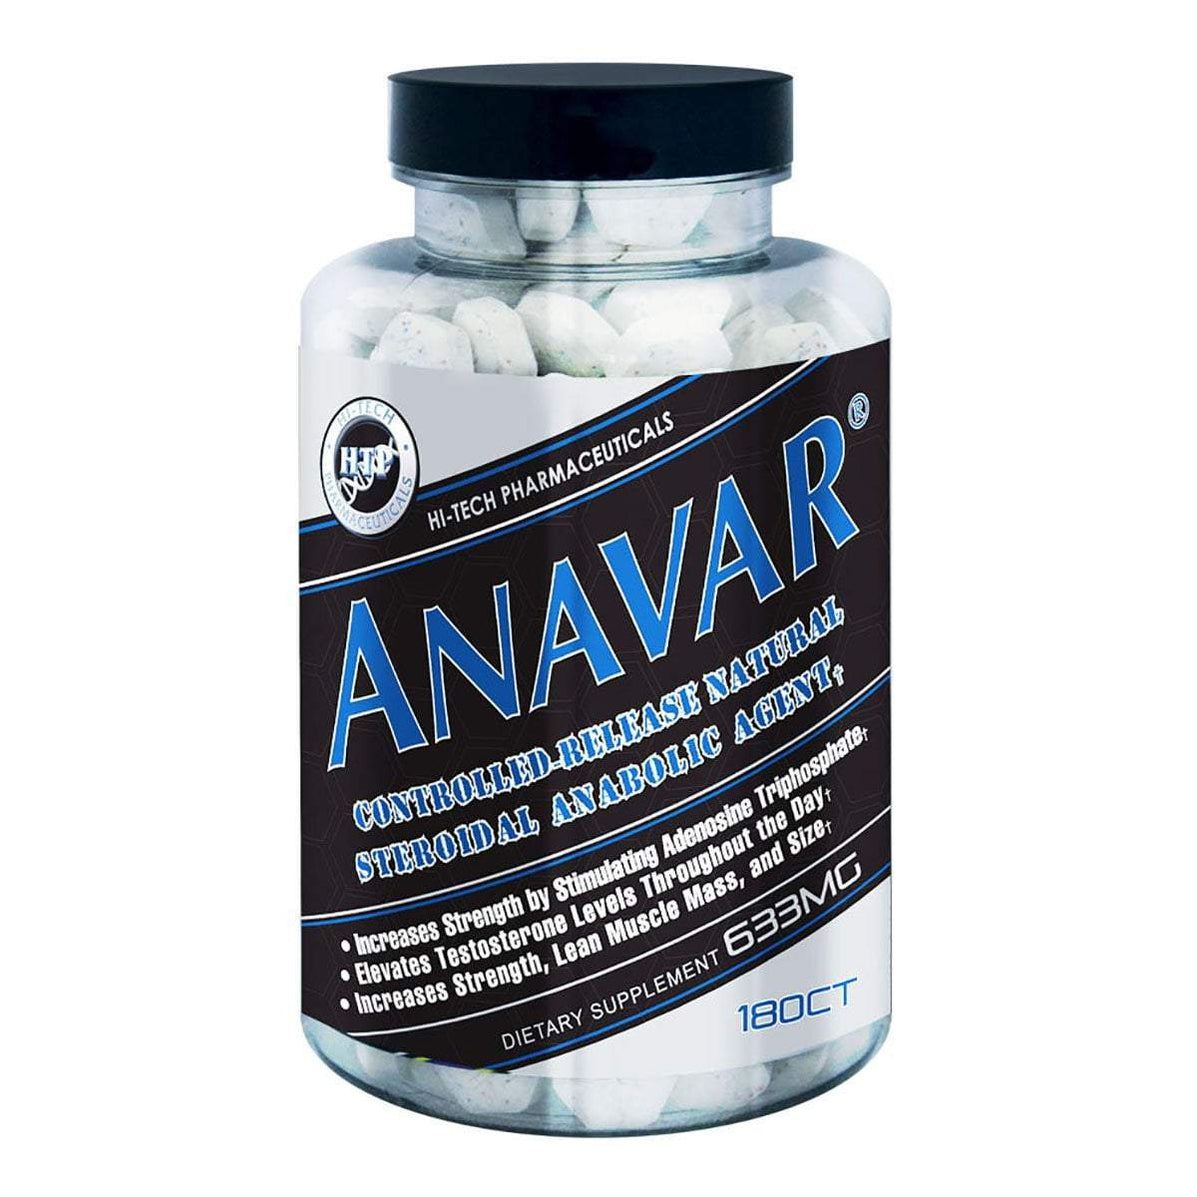 Looking for the Best Price for Anavar in USA?